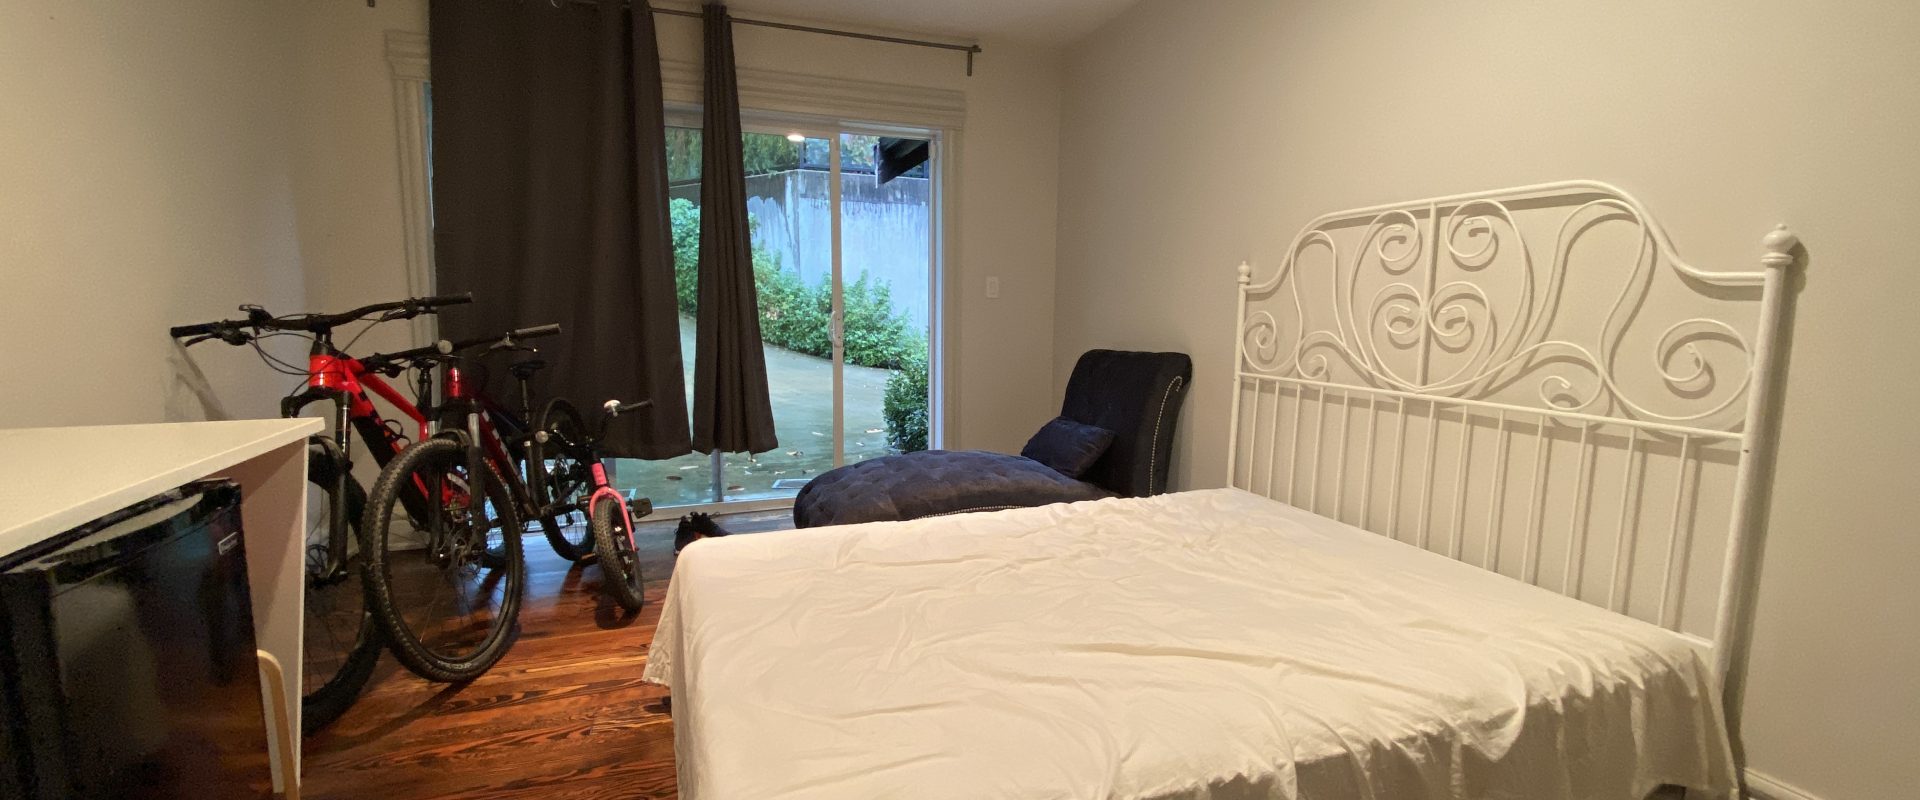 West Vancouver Spacious Studio for rent